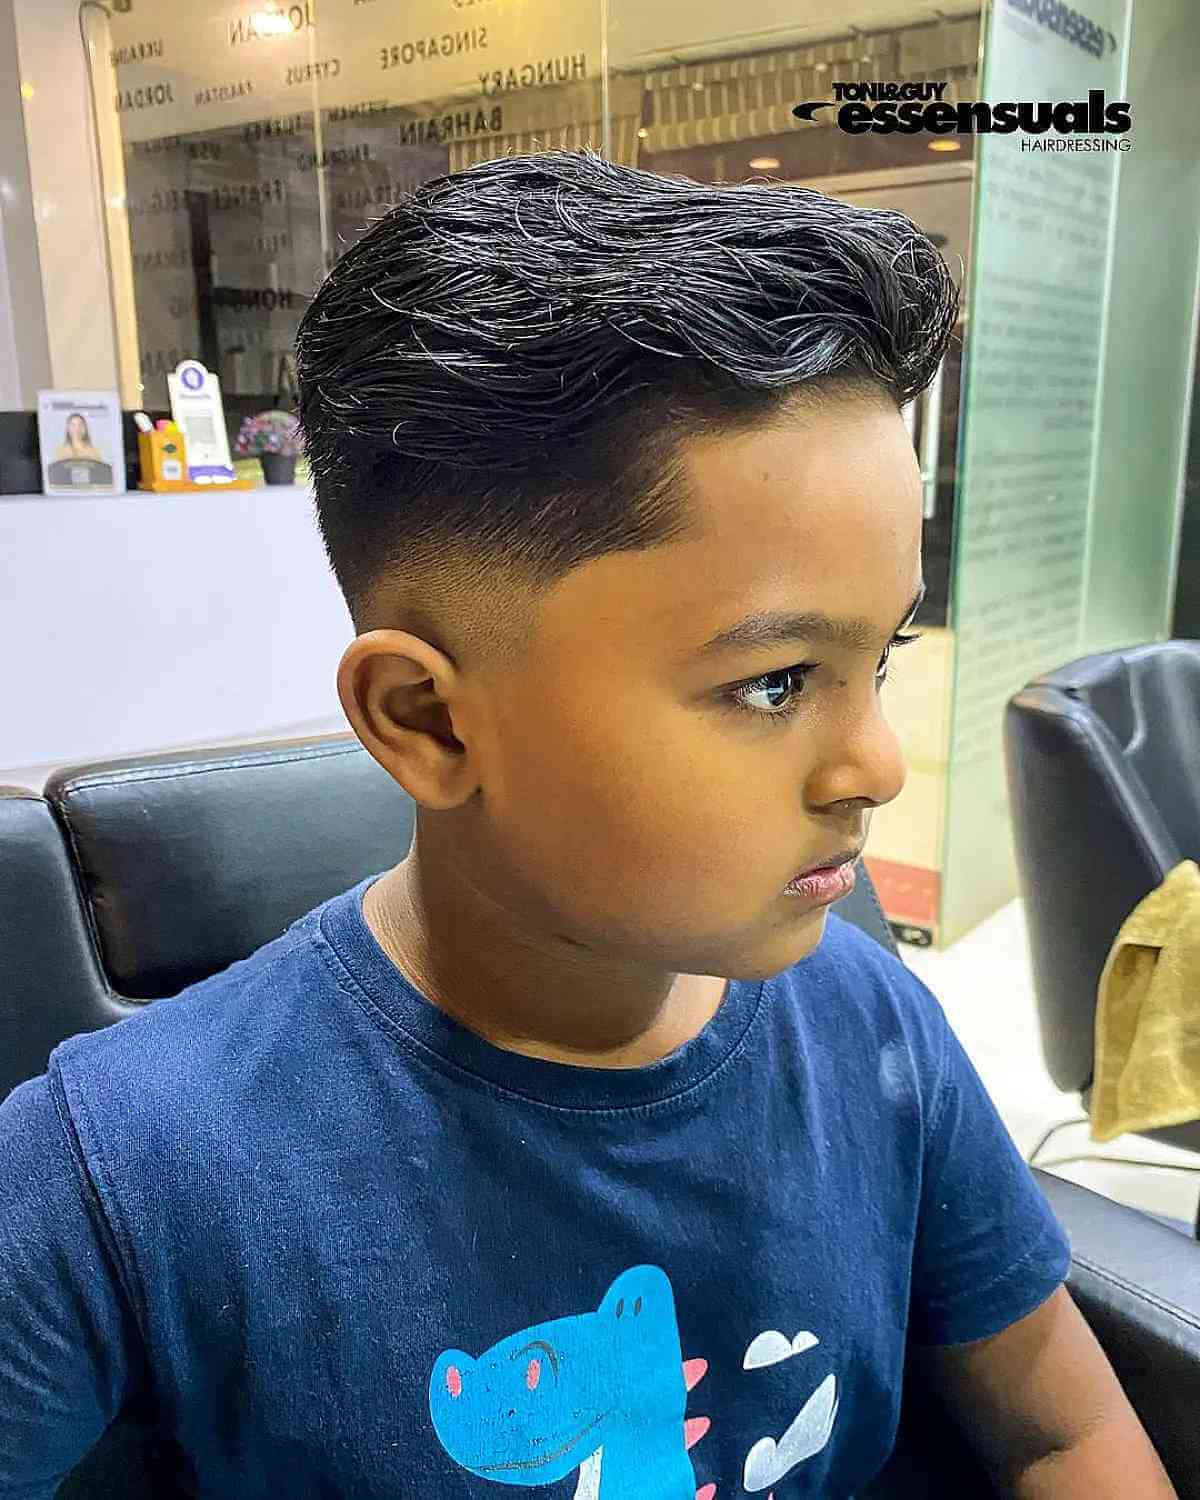 Details 82+ new hair style boy image latest